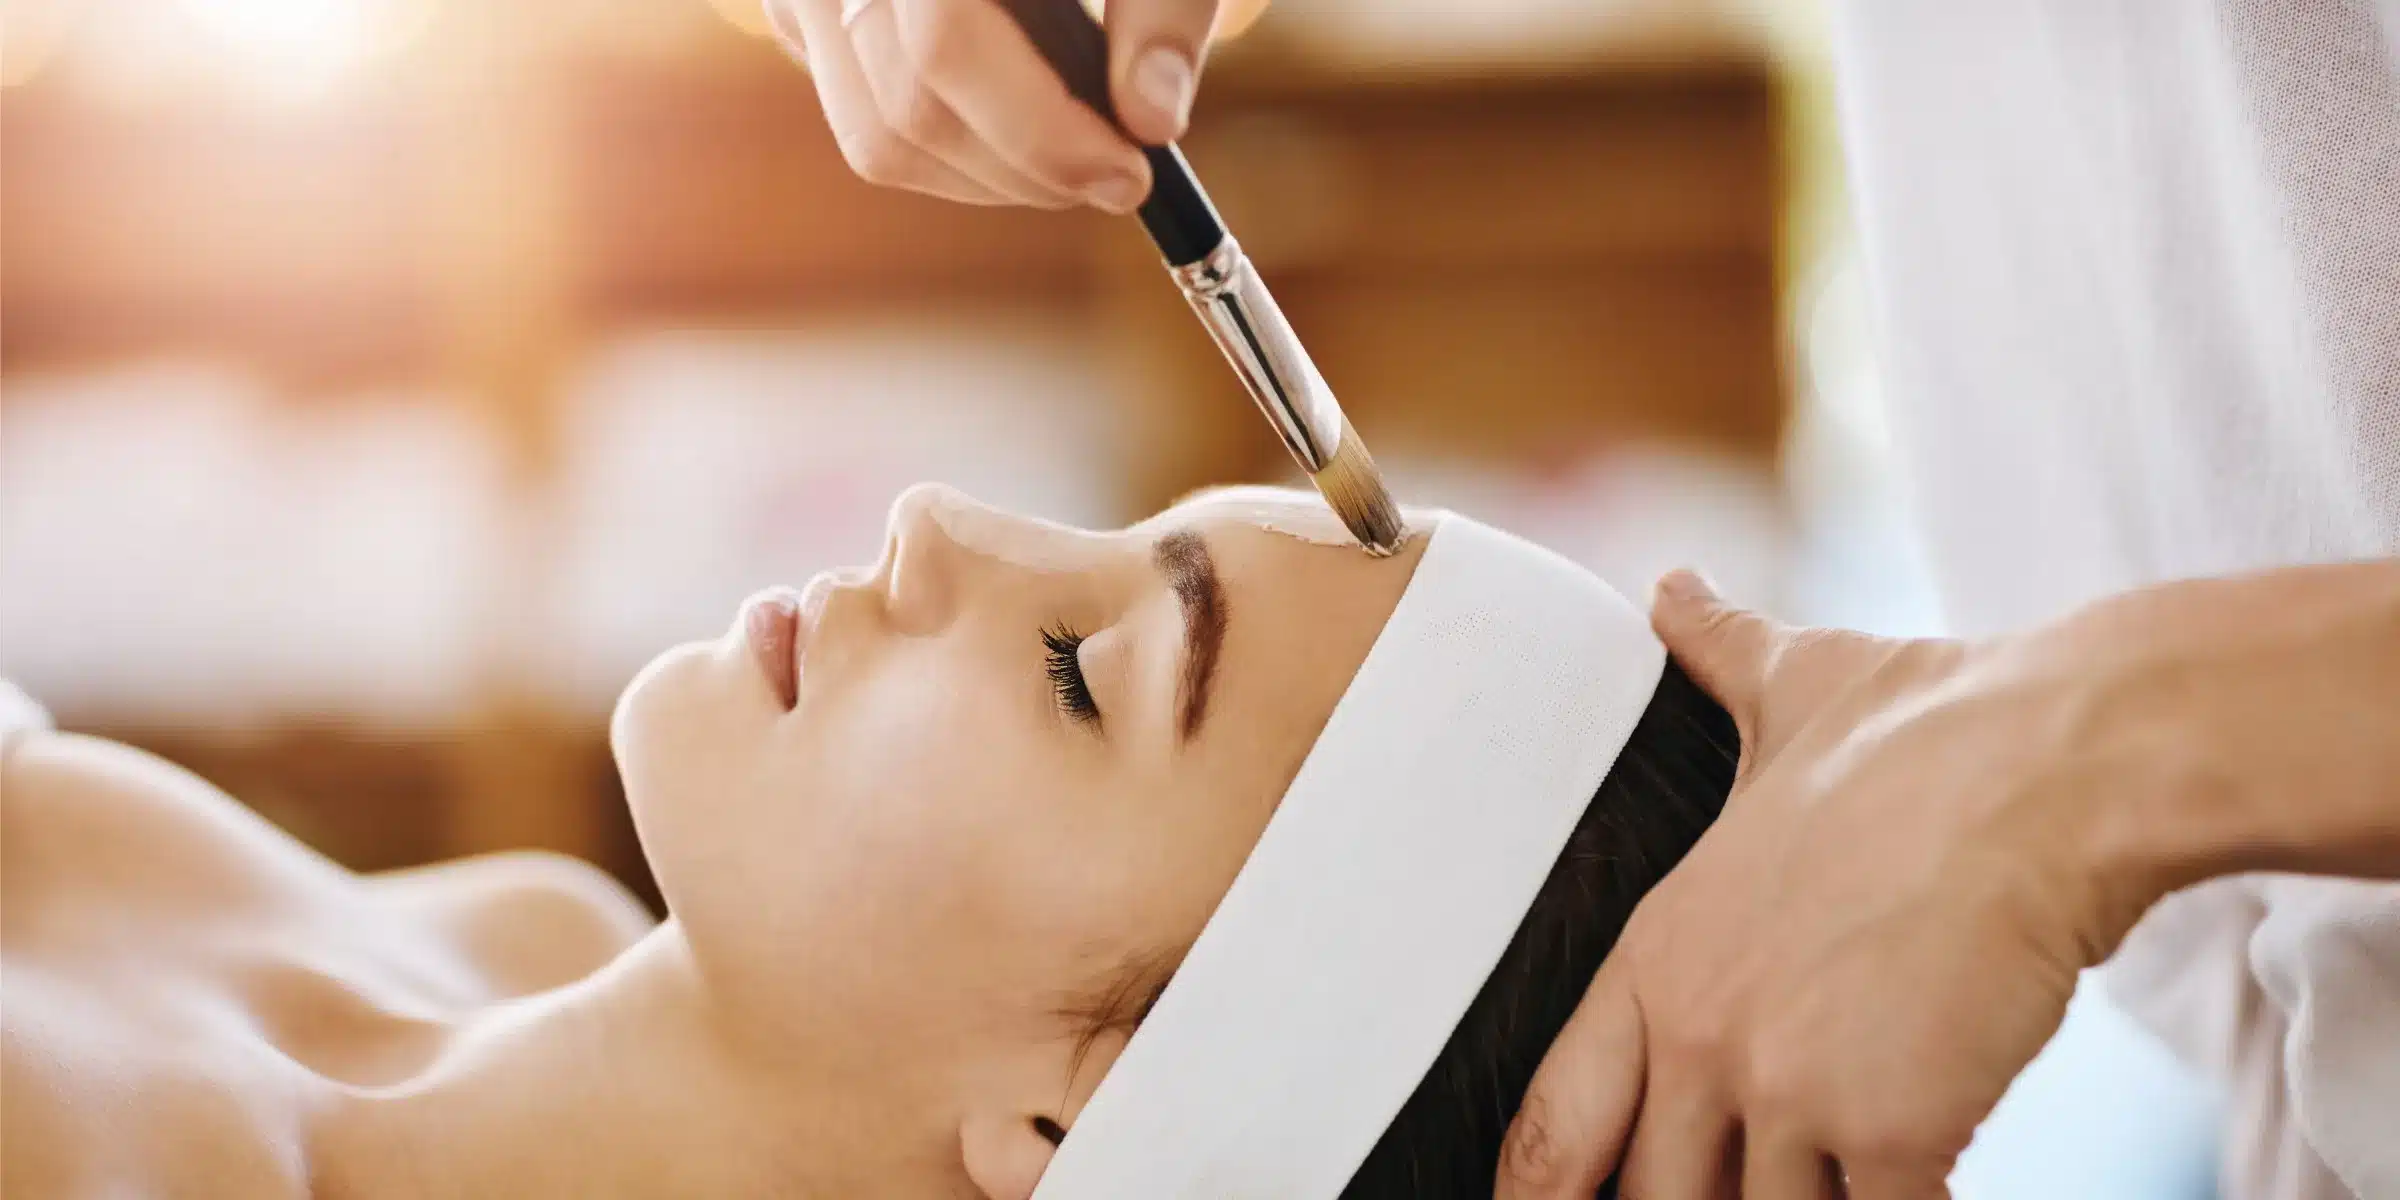 What Are the Benefits of Chemical Peels?